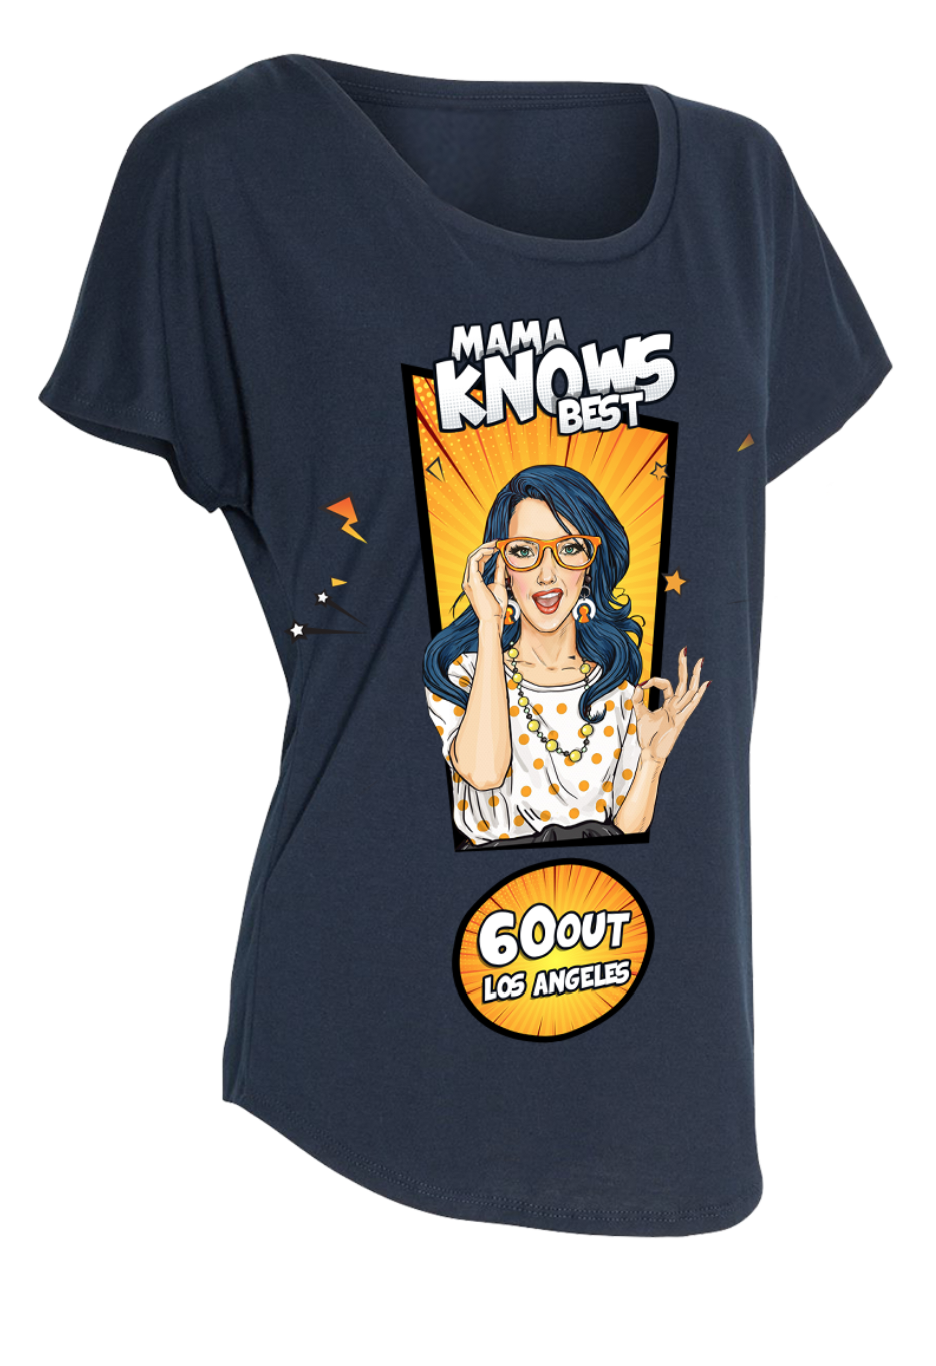 "Mama Knows Best" / 60out T-shirt